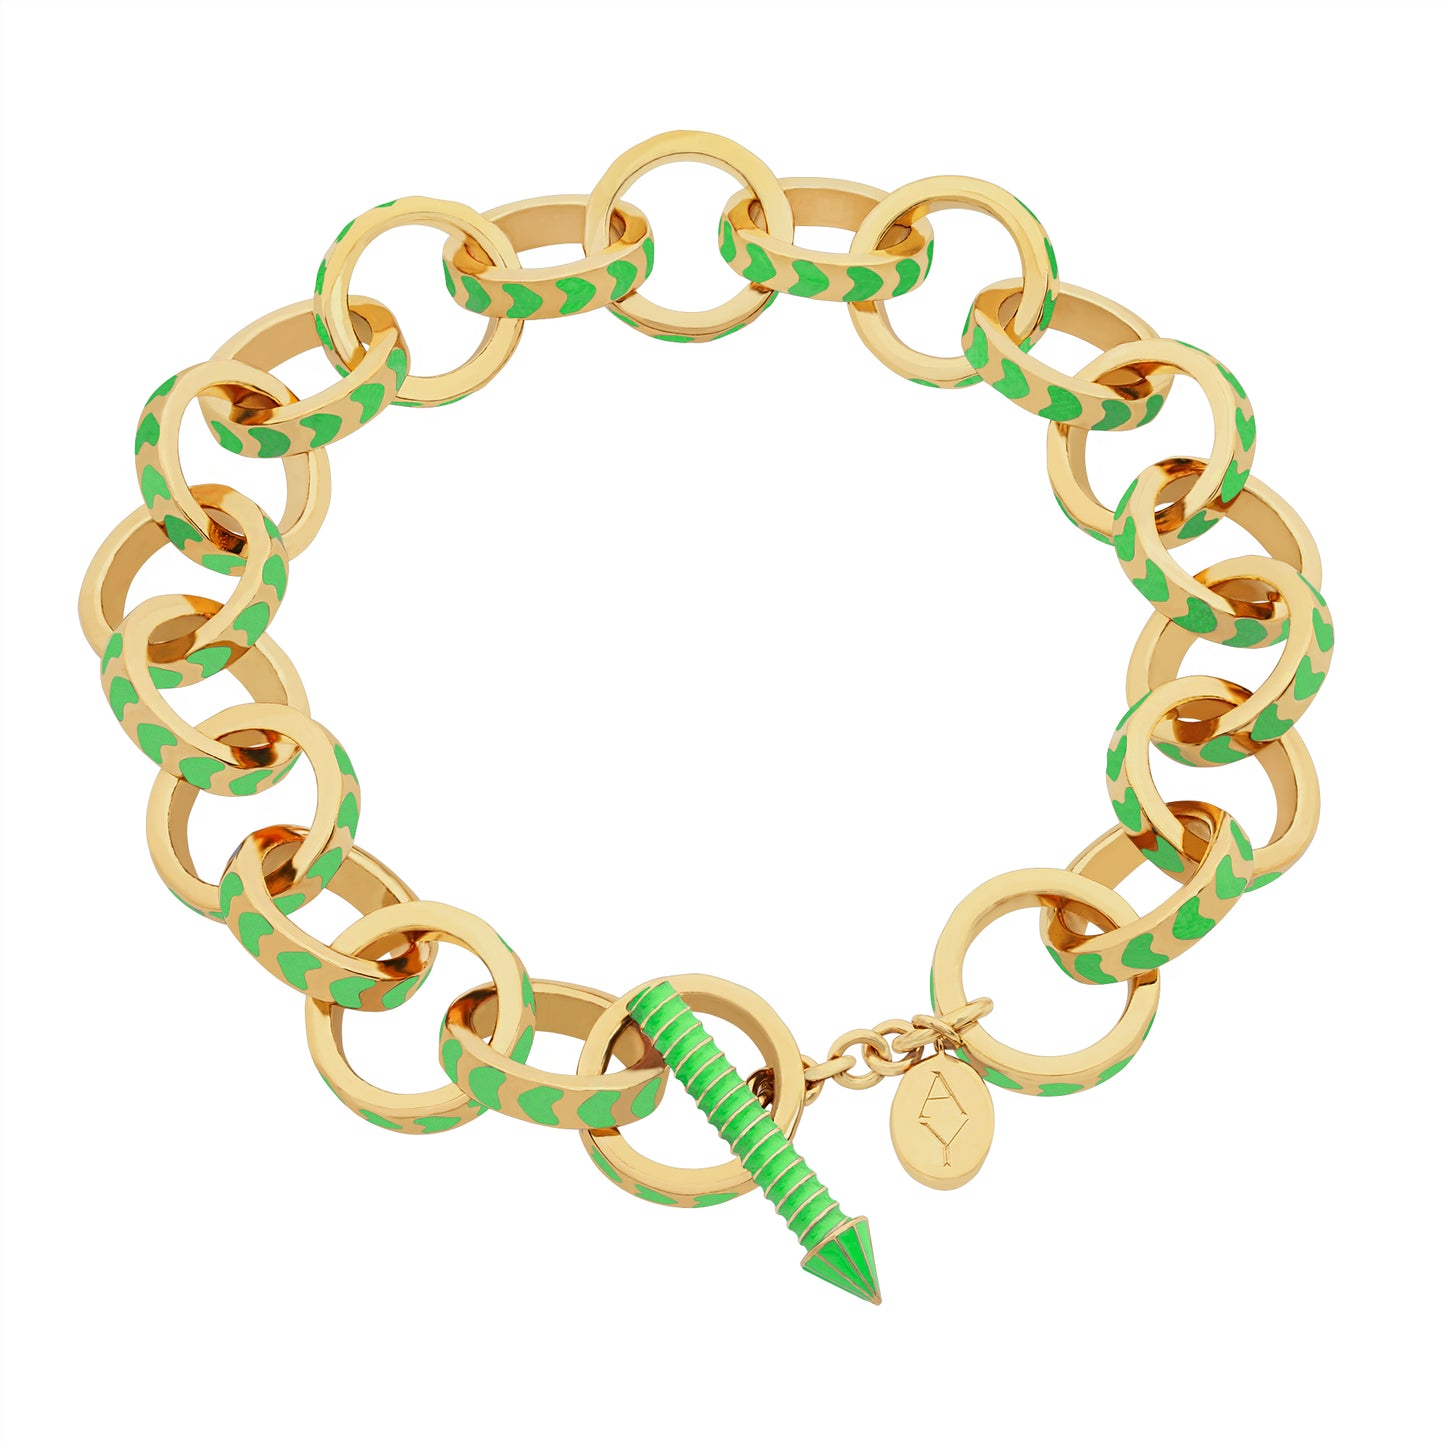 image of spark chain bracelet with green enamel in full circle lying flat on white background